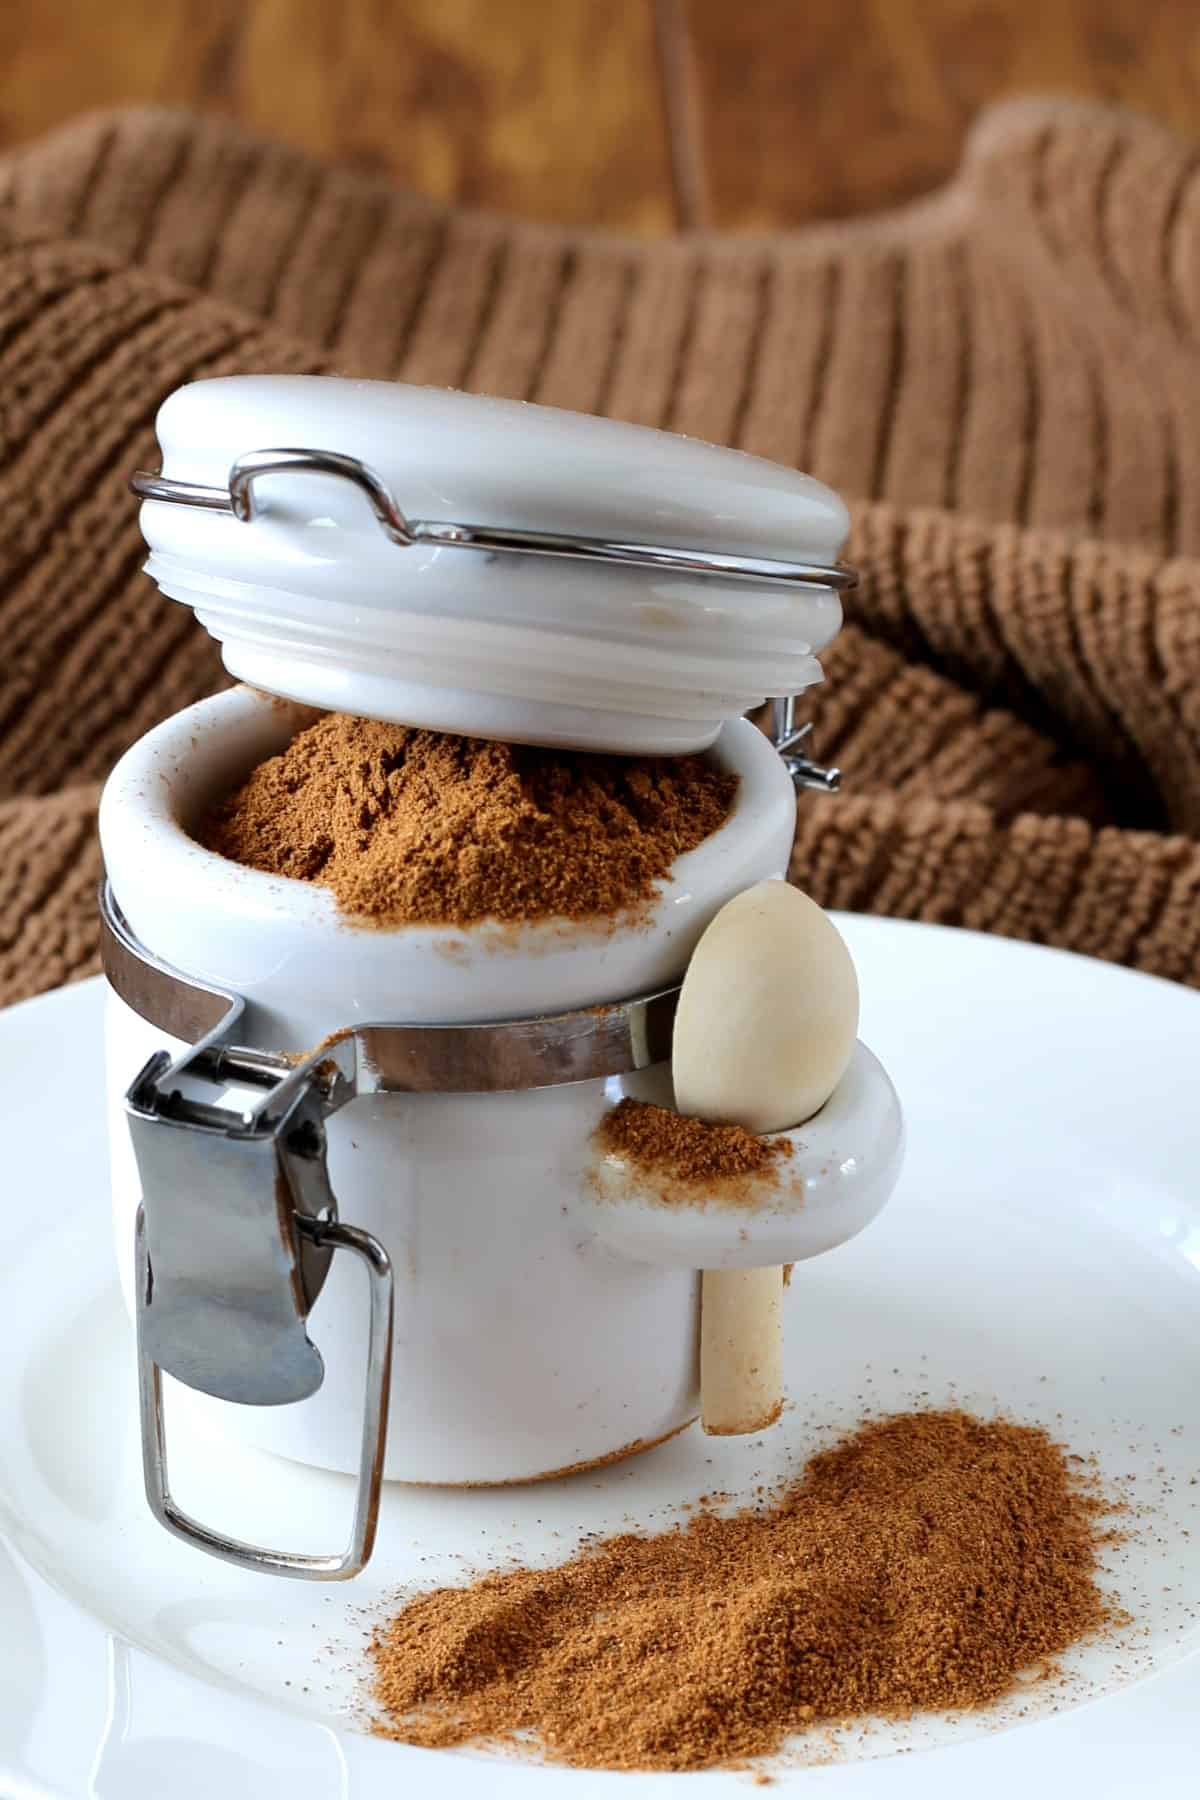 Small white jar with spoon in slot and spices overflowing onto white plate.